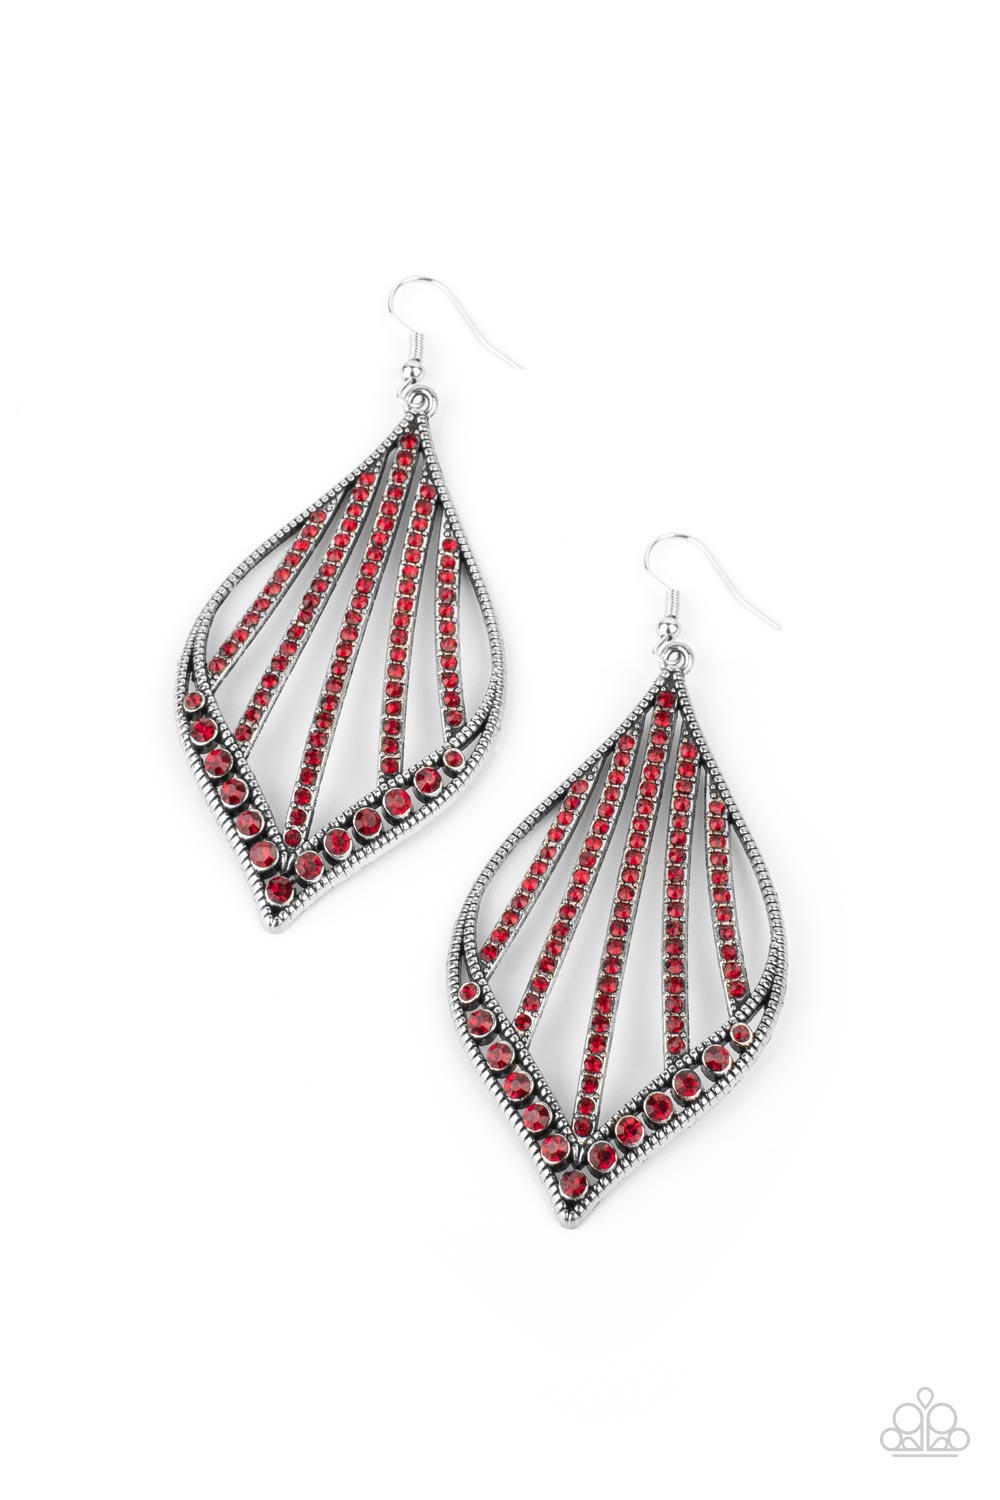 Paparazzi Accessories Earrings - Curved rows of glittery red rhinestones streak across the center of a studded marquise shaped silver frame.